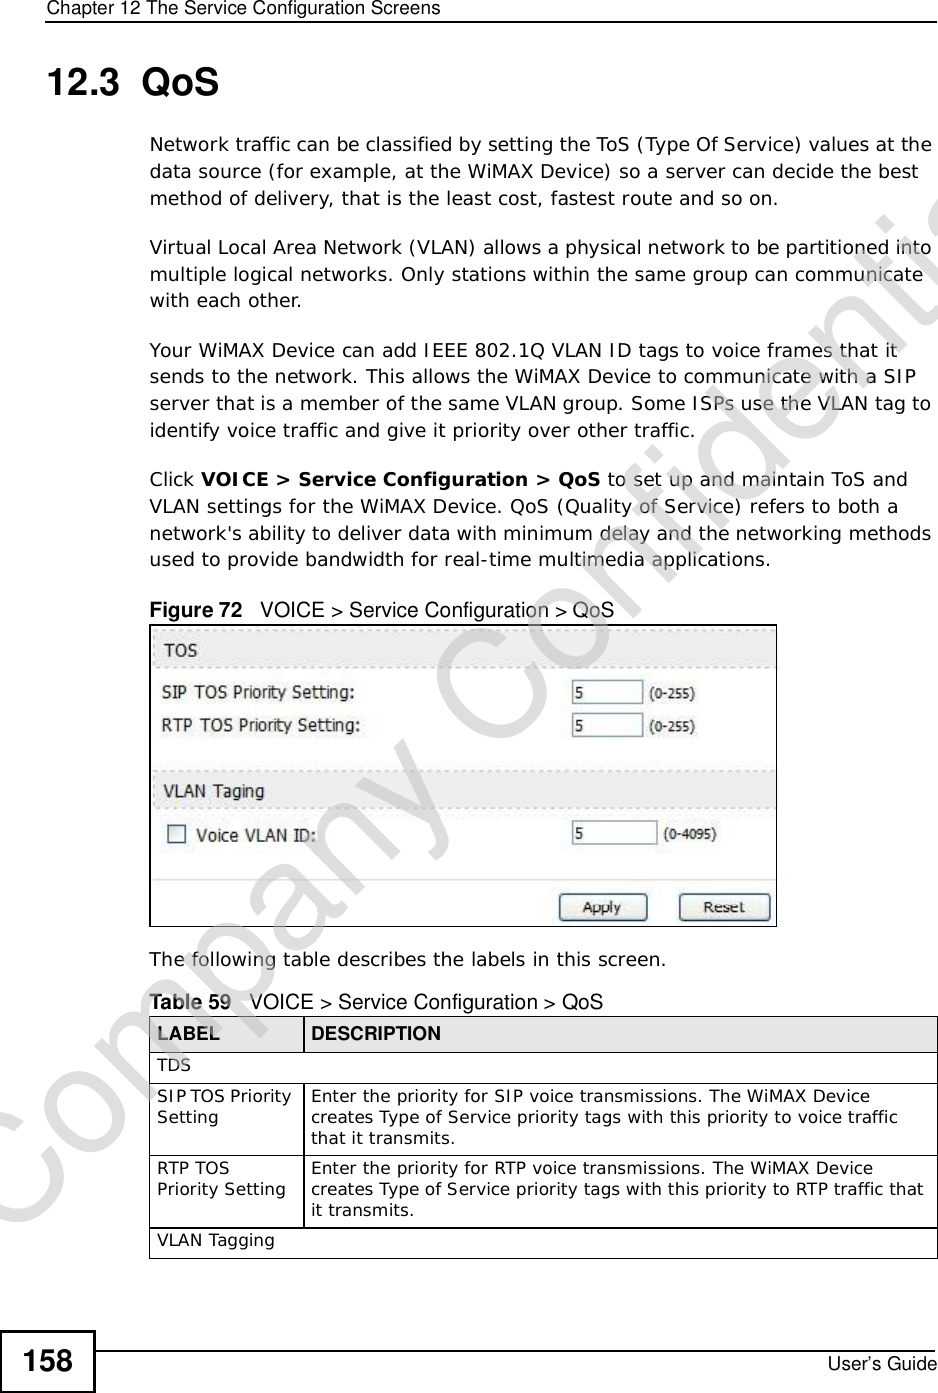 Chapter 12The Service Configuration ScreensUser’s Guide15812.3  QoSNetwork traffic can be classified by setting the ToS (Type Of Service) values at the data source (for example, at the WiMAX Device) so a server can decide the best method of delivery, that is the least cost, fastest route and so on.Virtual Local Area Network (VLAN) allows a physical network to be partitioned into multiple logical networks. Only stations within the same group can communicate with each other. Your WiMAX Device can add IEEE 802.1Q VLAN ID tags to voice frames that it sends to the network. This allows the WiMAX Device to communicate with a SIP server that is a member of the same VLAN group. Some ISPs use the VLAN tag to identify voice traffic and give it priority over other traffic.Click VOICE &gt; Service Configuration &gt; QoS to set up and maintain ToS and VLAN settings for the WiMAX Device. QoS (Quality of Service) refers to both a network&apos;s ability to deliver data with minimum delay and the networking methods used to provide bandwidth for real-time multimedia applications.Figure 72   VOICE &gt; Service Configuration &gt; QoSThe following table describes the labels in this screen.Table 59   VOICE &gt; Service Configuration &gt; QoSLABEL DESCRIPTIONTDSSIP TOS Priority Setting Enter the priority for SIP voice transmissions. The WiMAX Device creates Type of Service priority tags with this priority to voice traffic that it transmits.RTP TOS Priority Setting Enter the priority for RTP voice transmissions. The WiMAX Device creates Type of Service priority tags with this priority to RTP traffic that it transmits.VLAN TaggingCompany Confidential